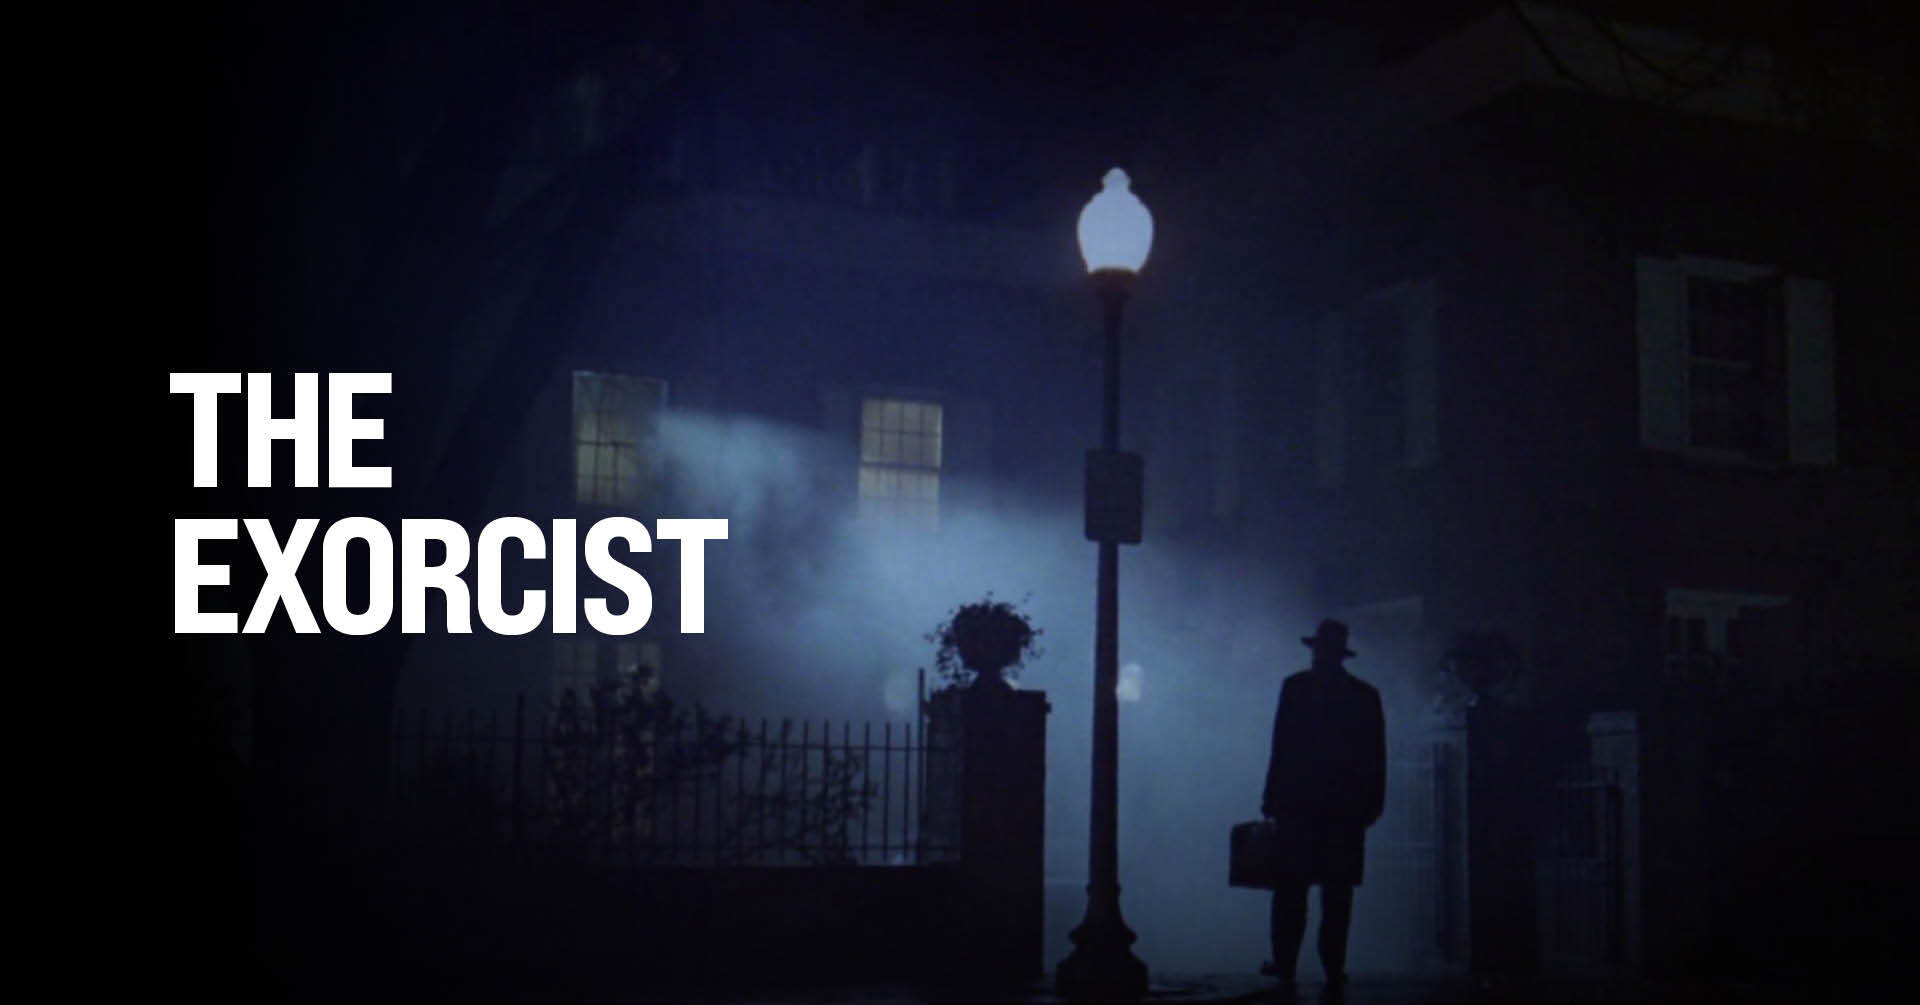 46-facts-about-the-movie-the-exorcist